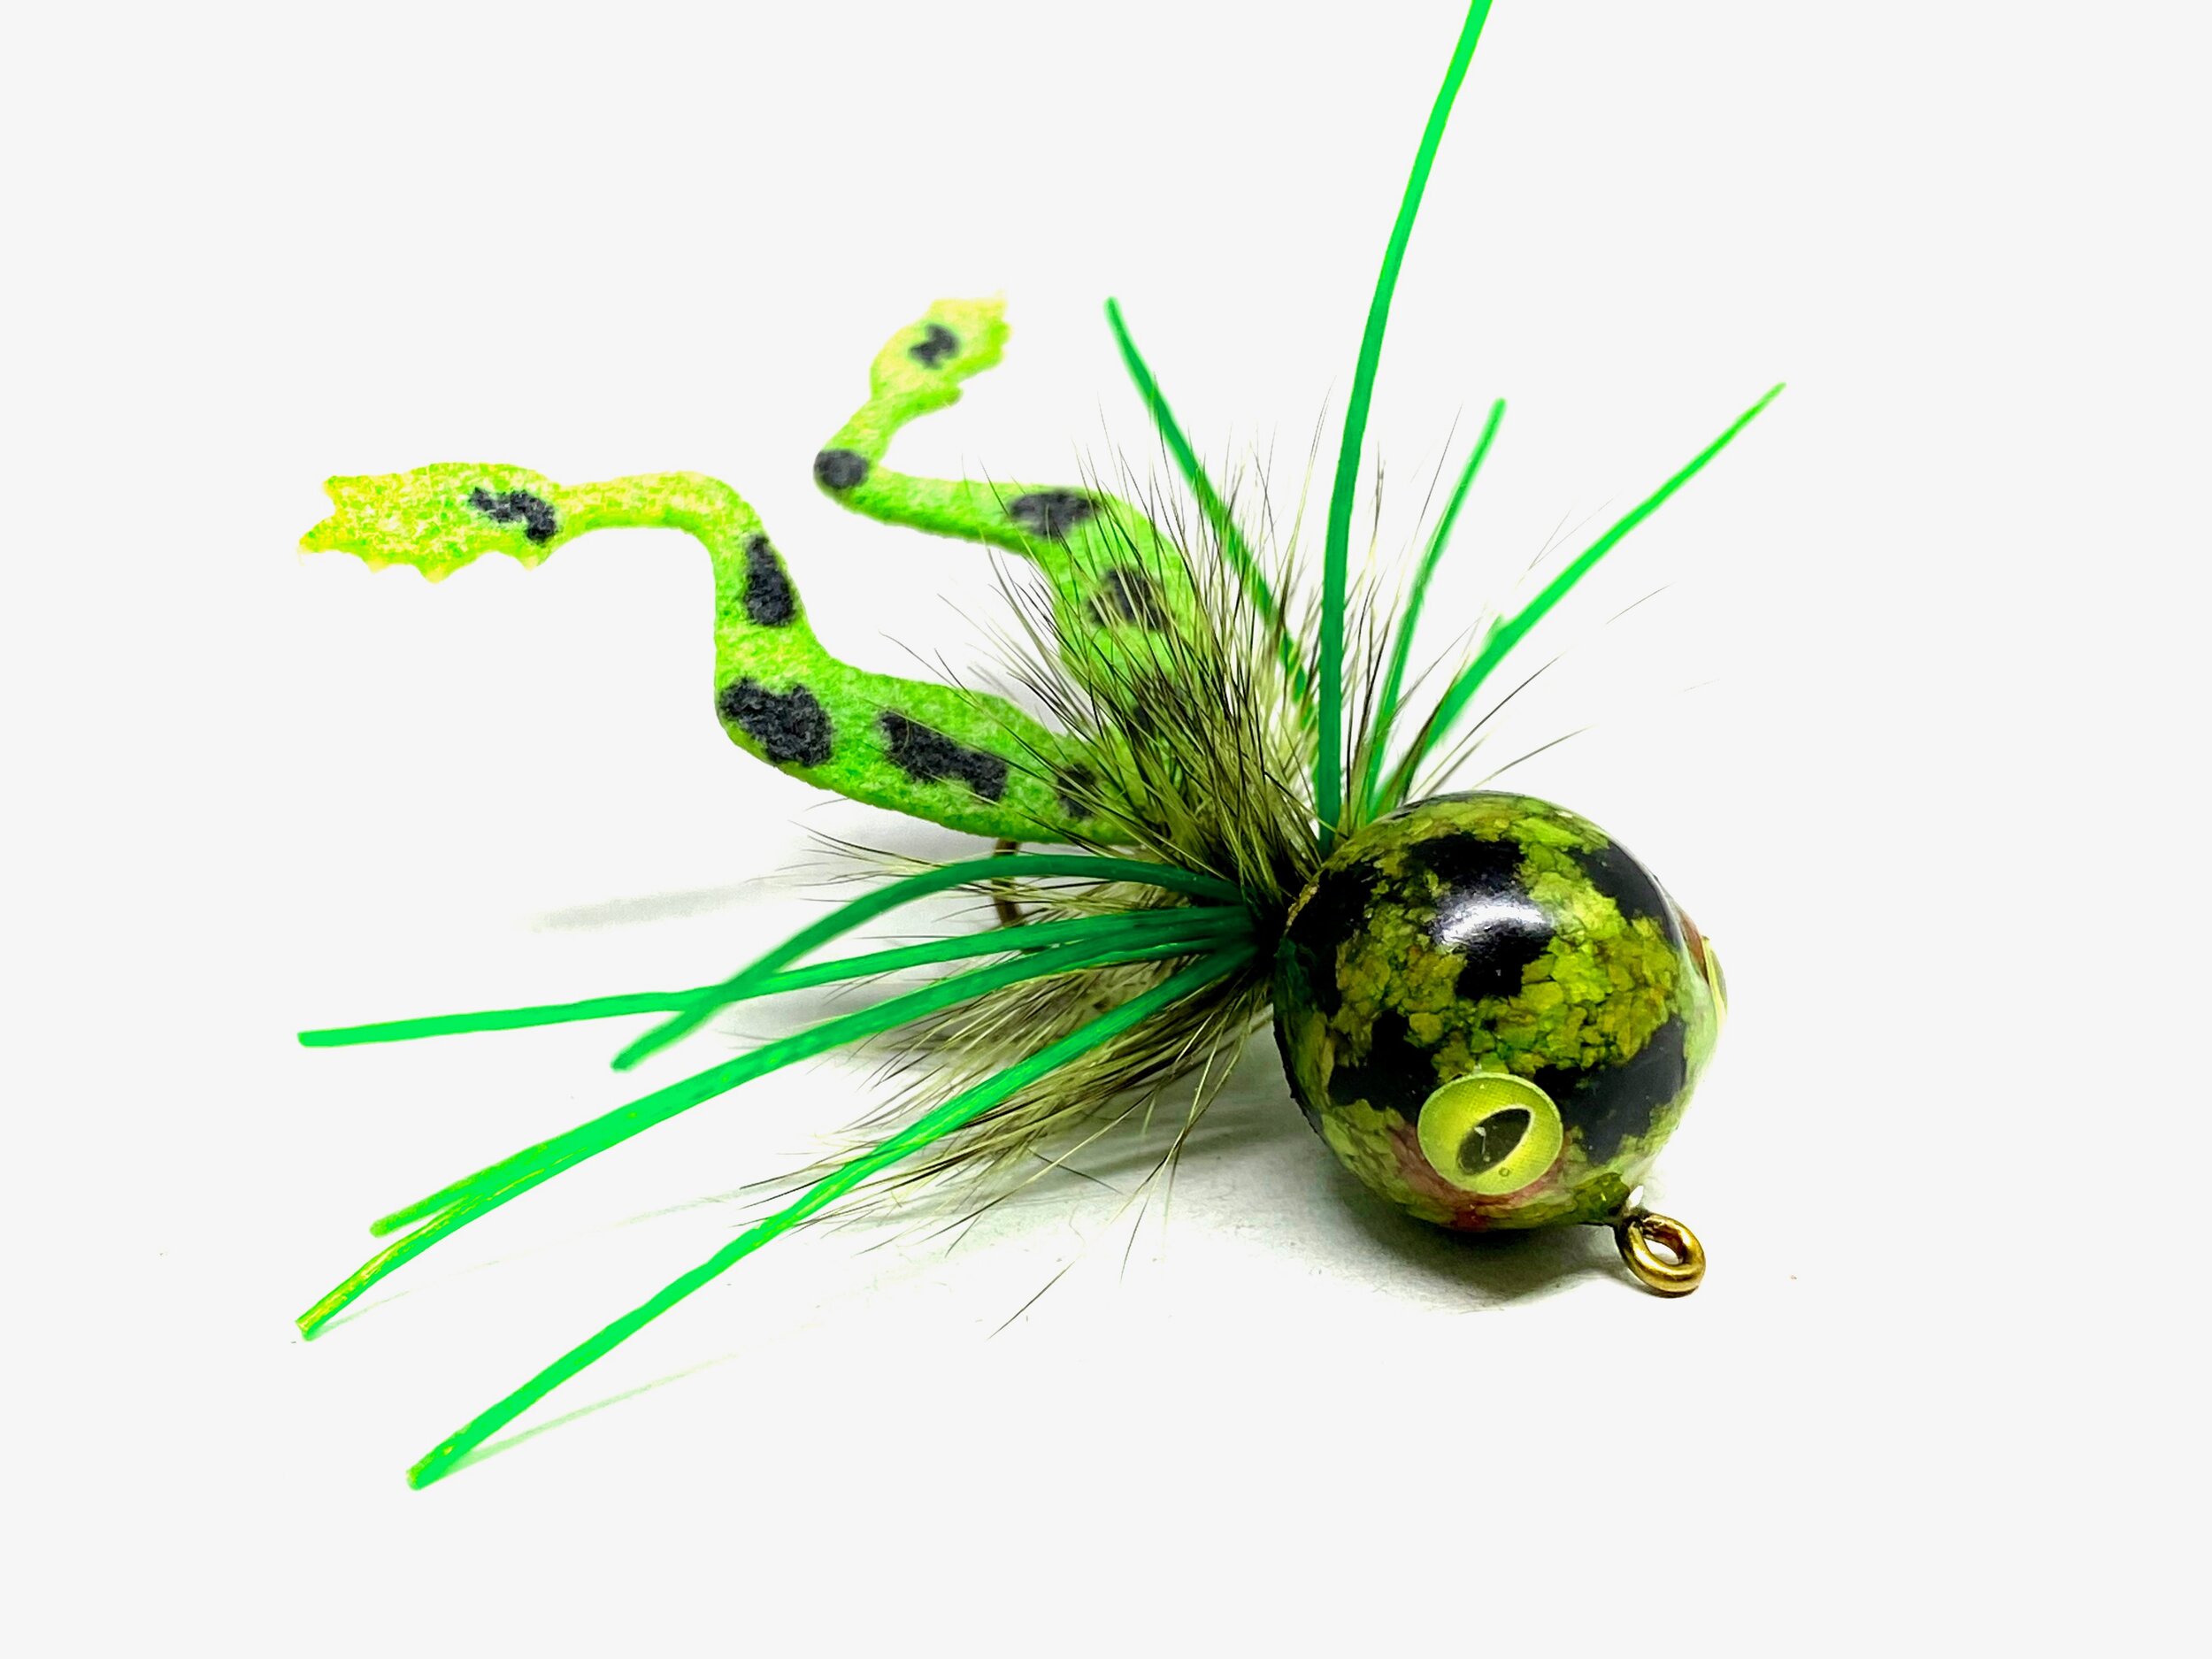 Tying the STP Frog - Fly Fisherman